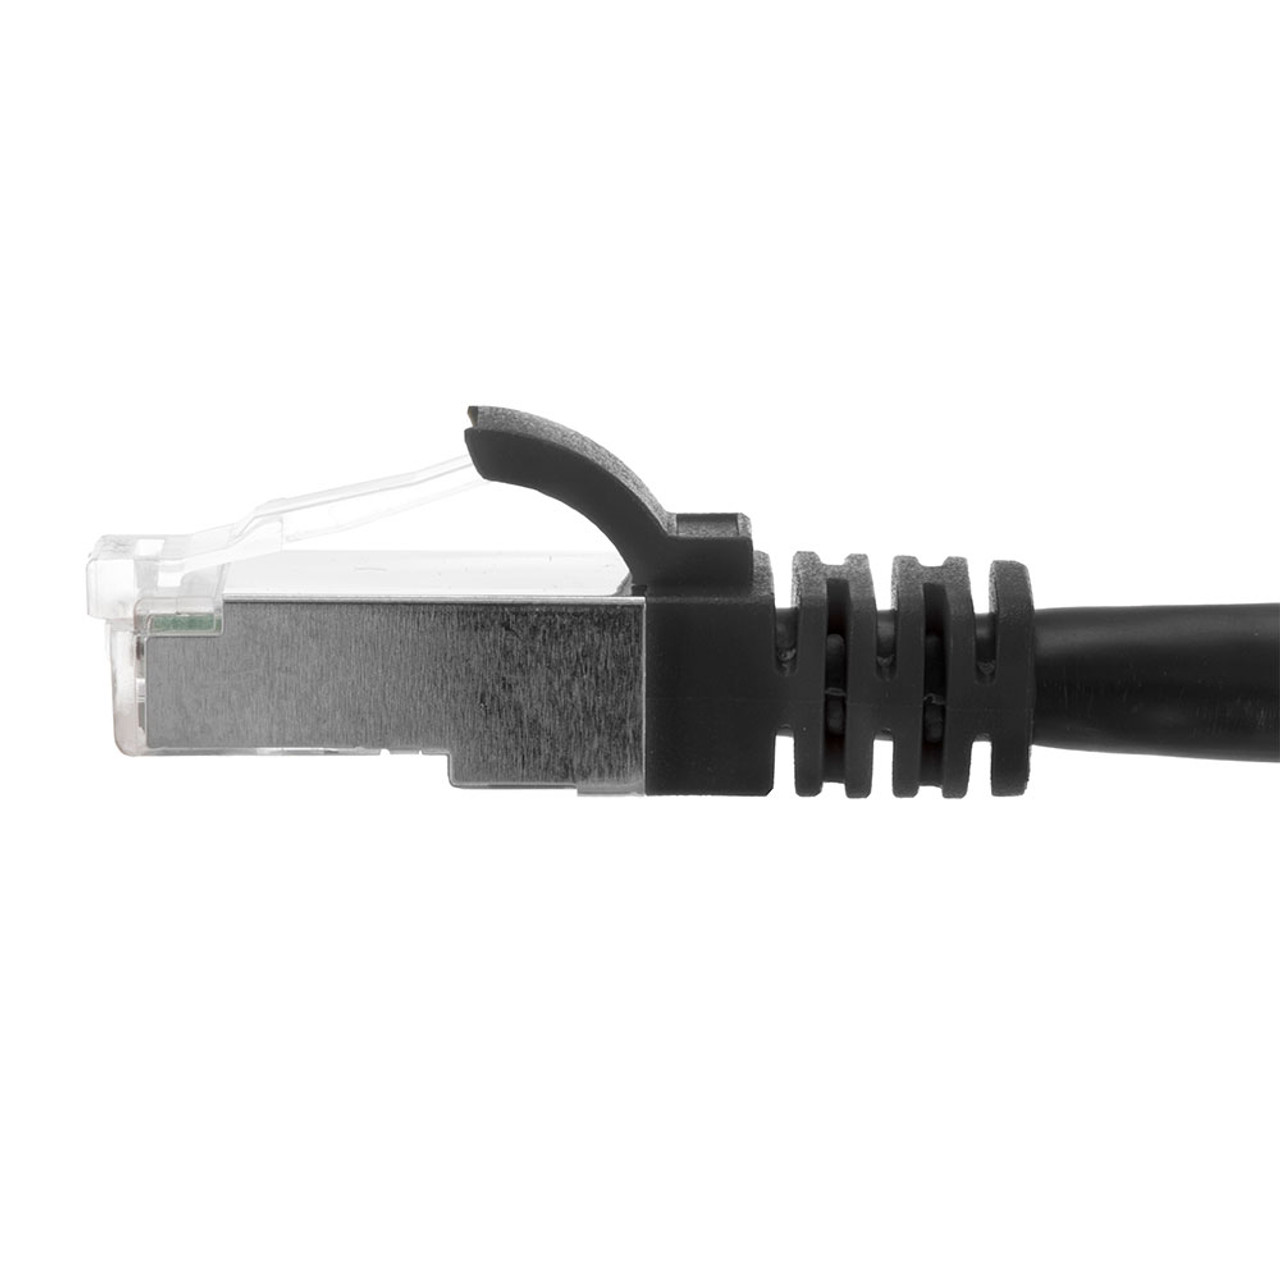 Ethernet Patch Cable CAT6A, S/FTP, 26AWG, 7 Ft,  5 pack, Black